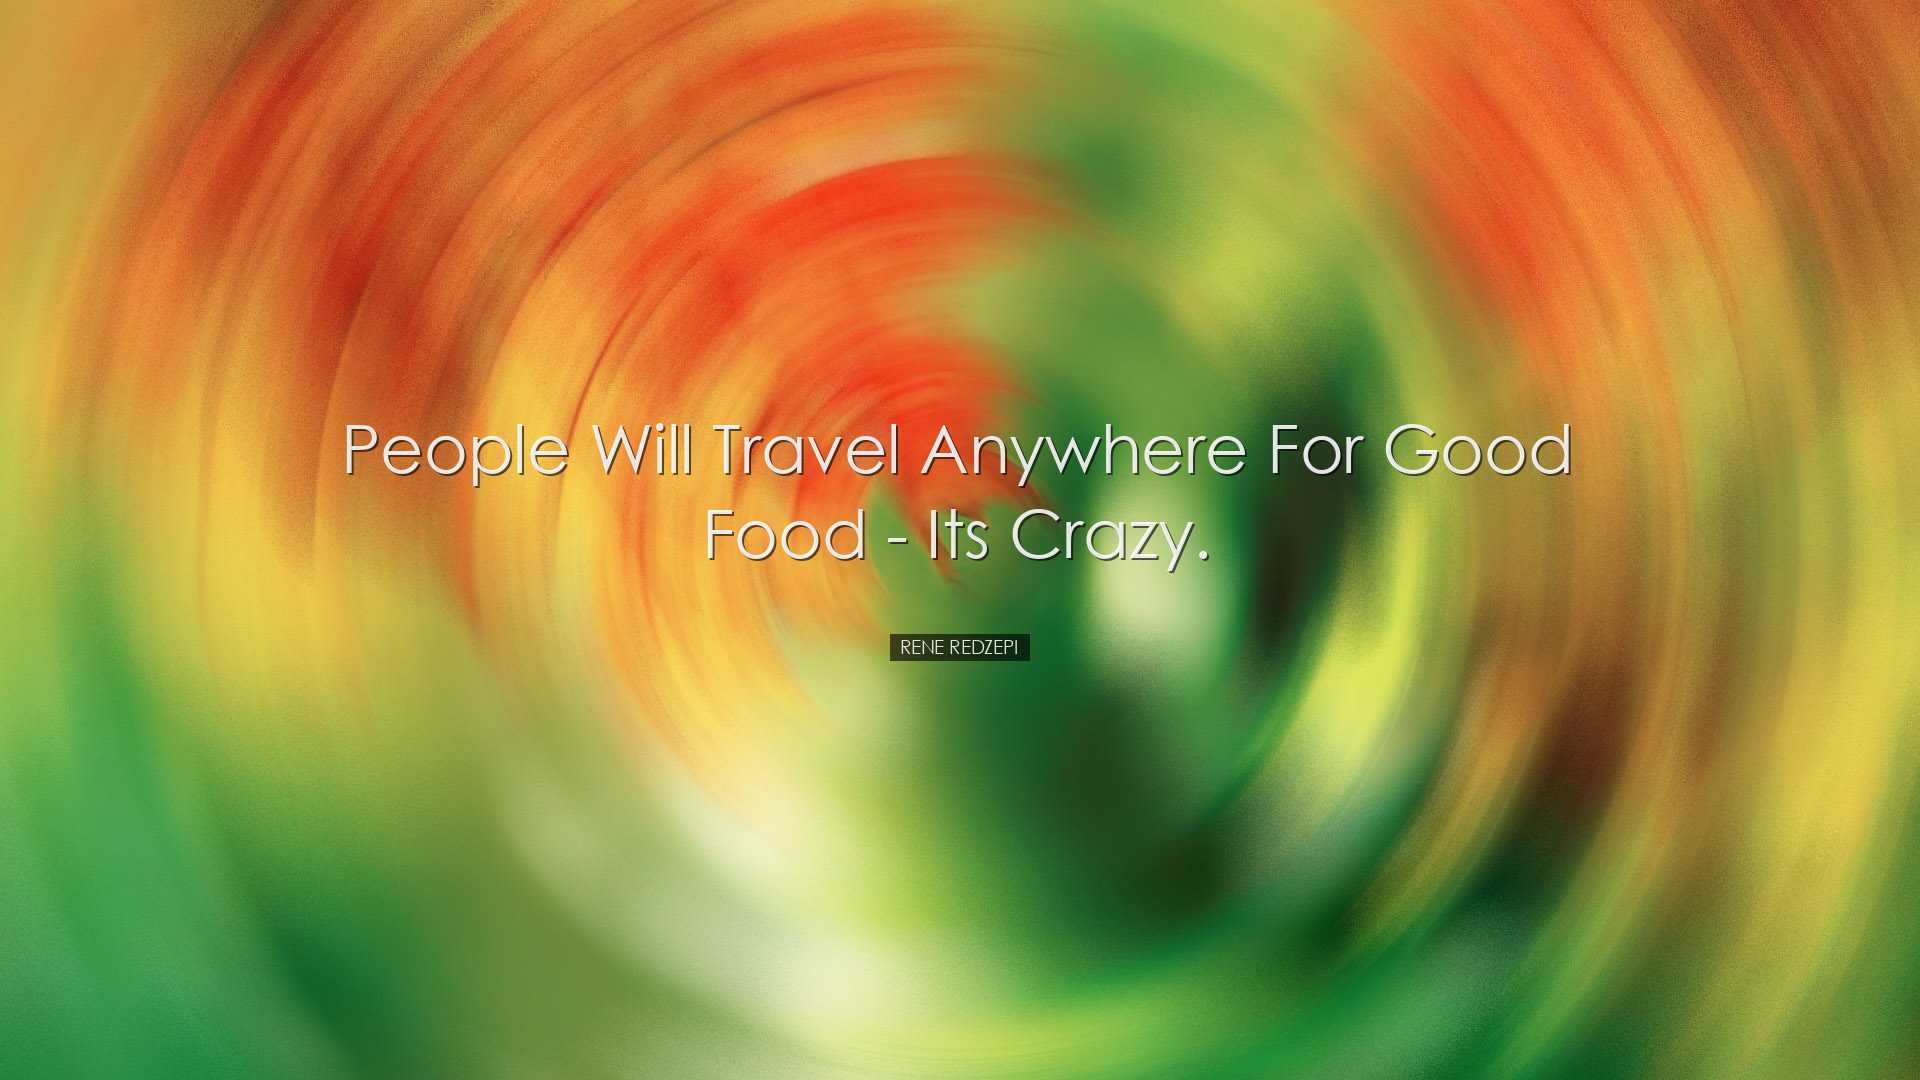 People will travel anywhere for good food - its crazy. - Rene Redz